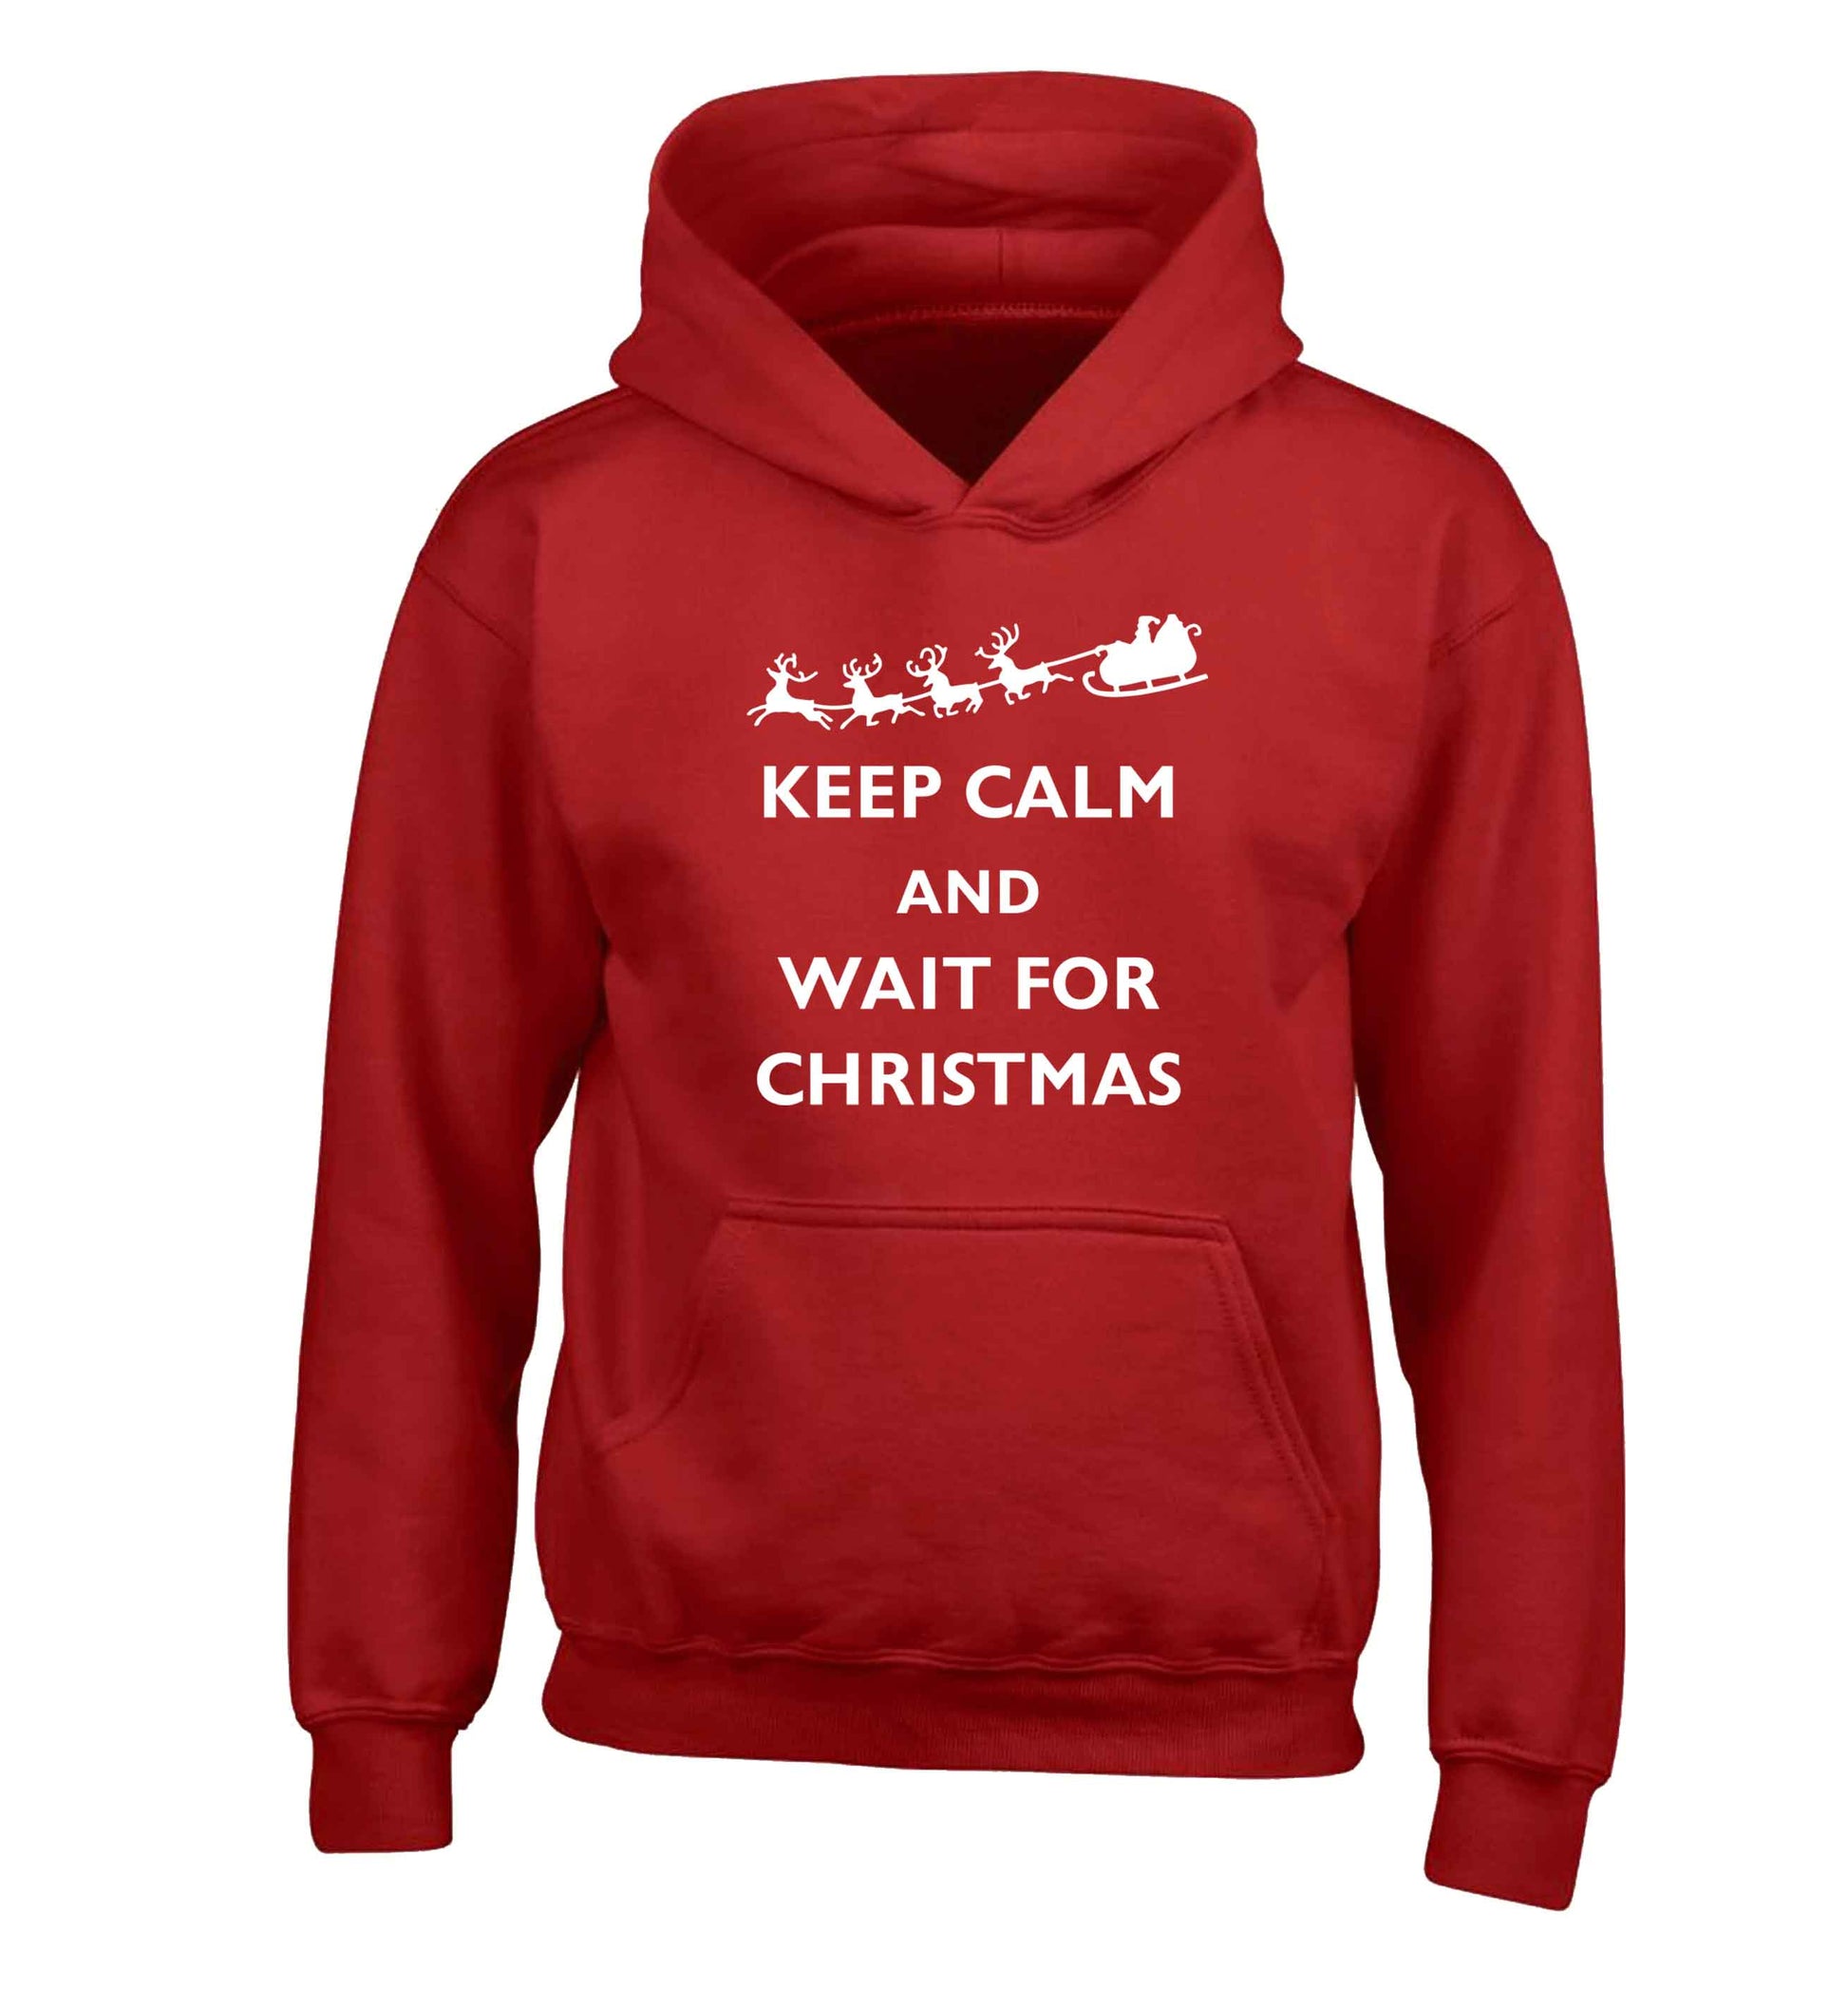 Keep calm and wait for Christmas children's red hoodie 12-13 Years